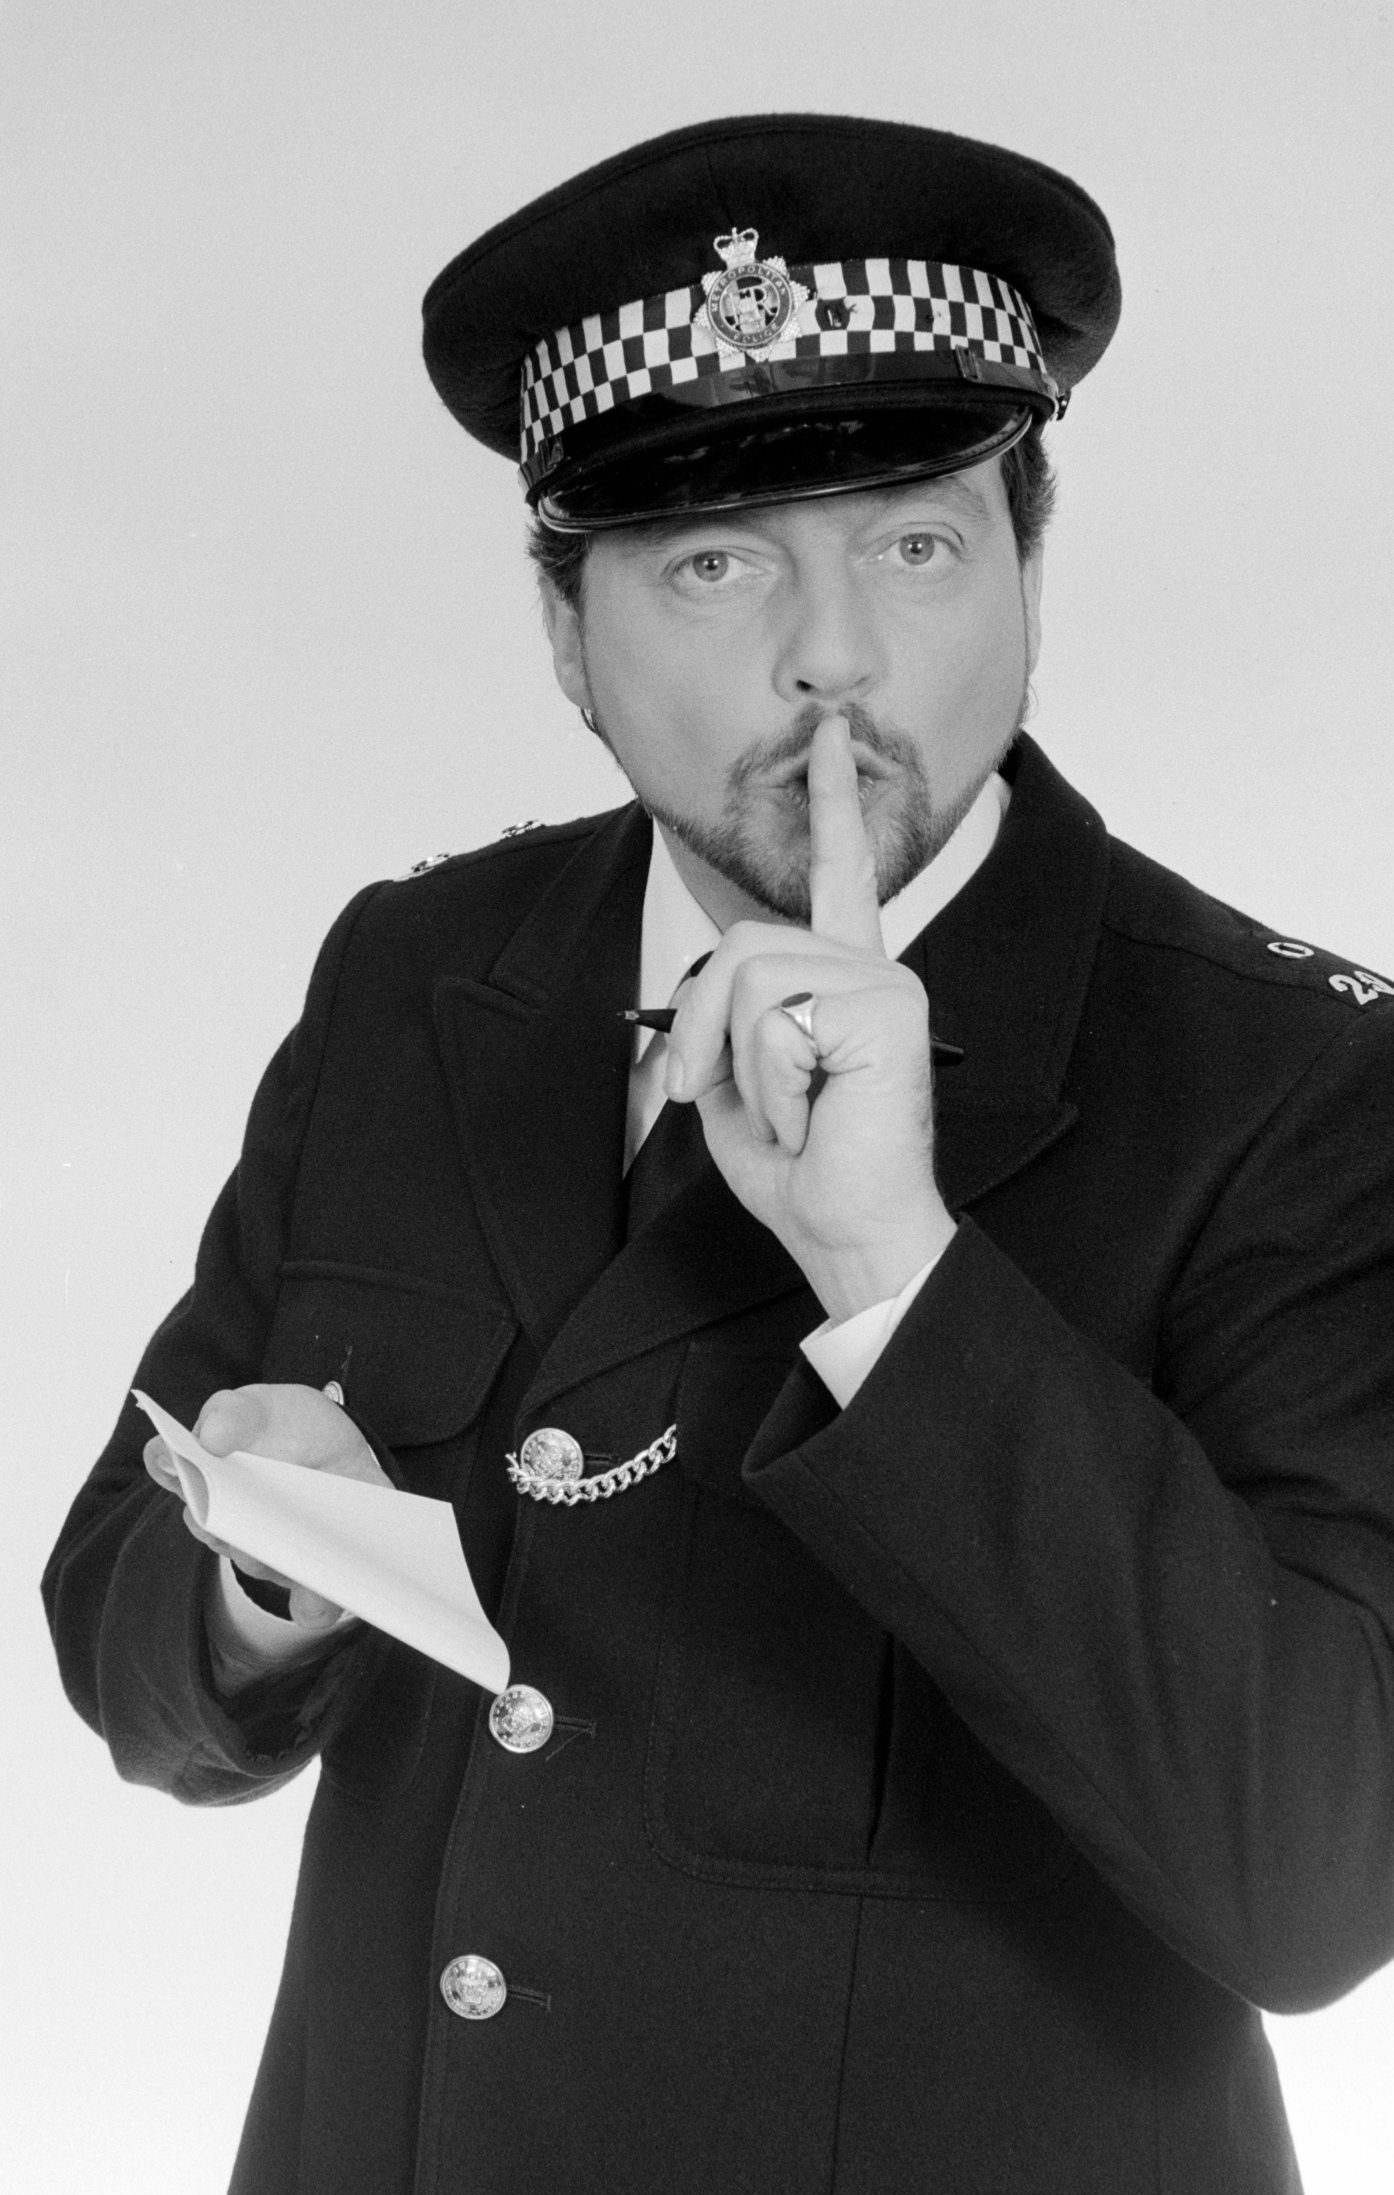 Jeremy Beadle, dressed as a police officer, was the king of pranksters in the 1980s and 1990s.